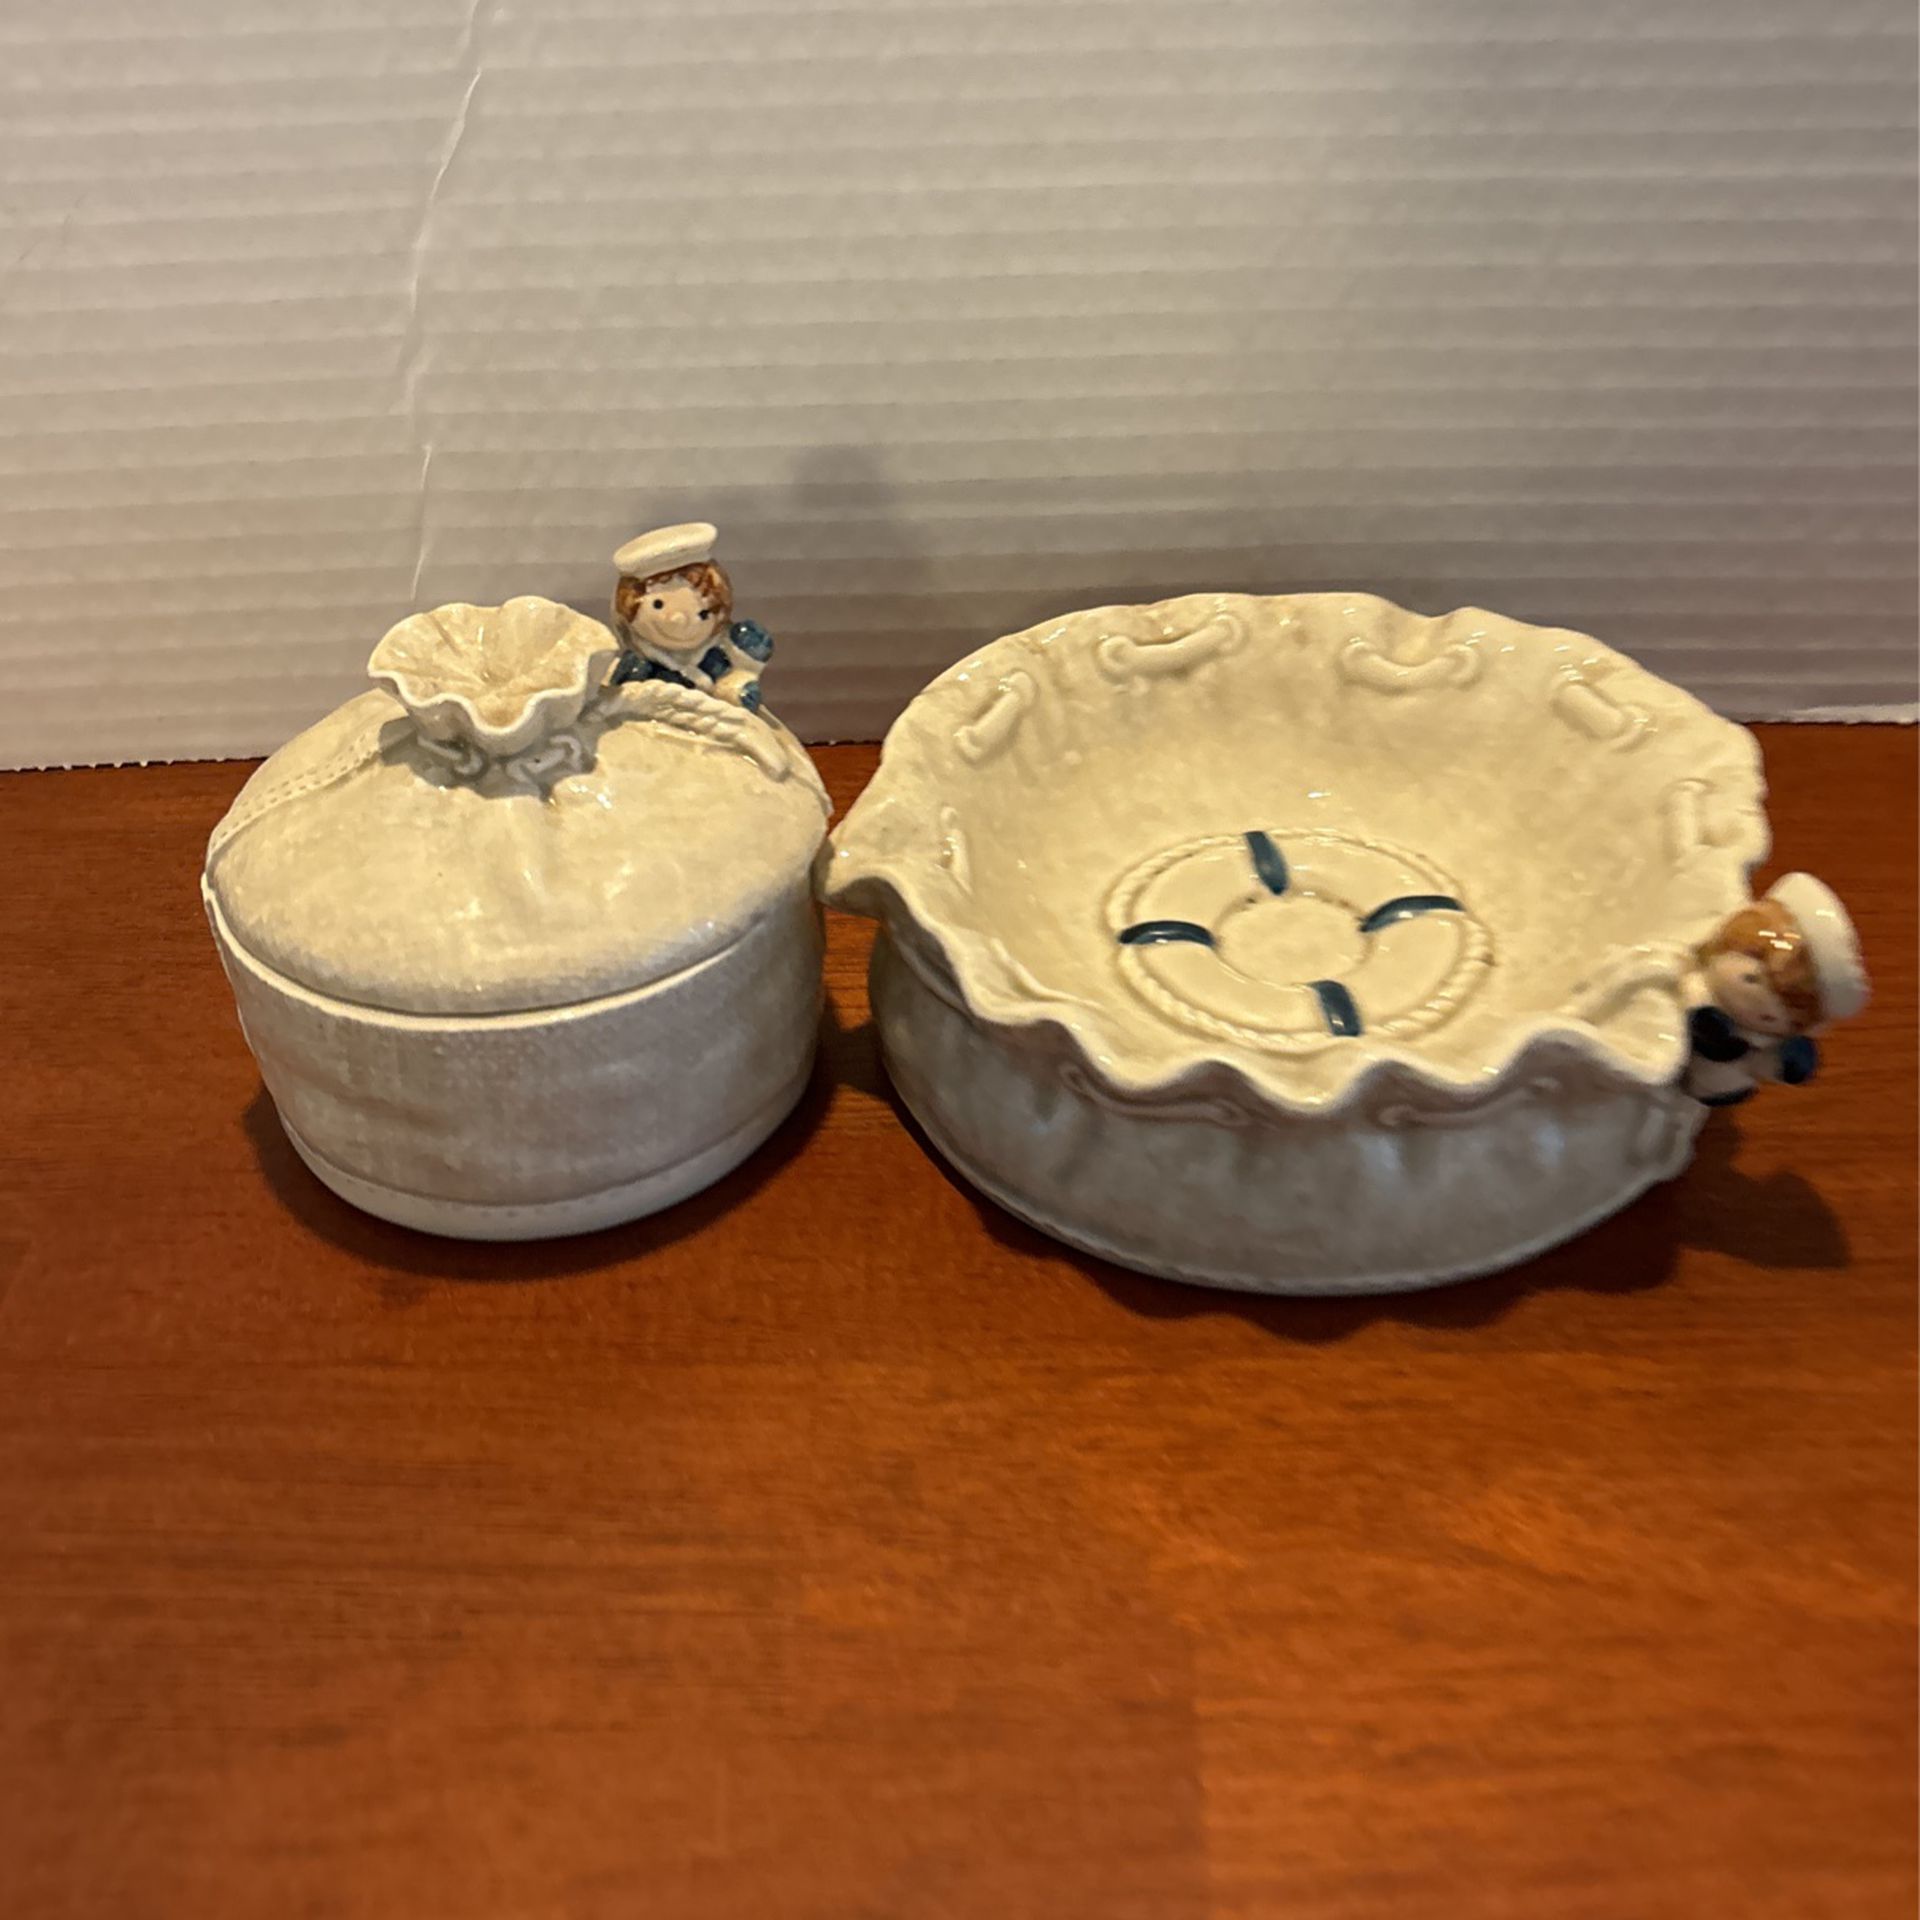 1977 Nesco Nautical Astray And Trinket Dish Raggedy Andy 5“ By One A Half Inch And Trinket Dish 4“ X 3“ L1